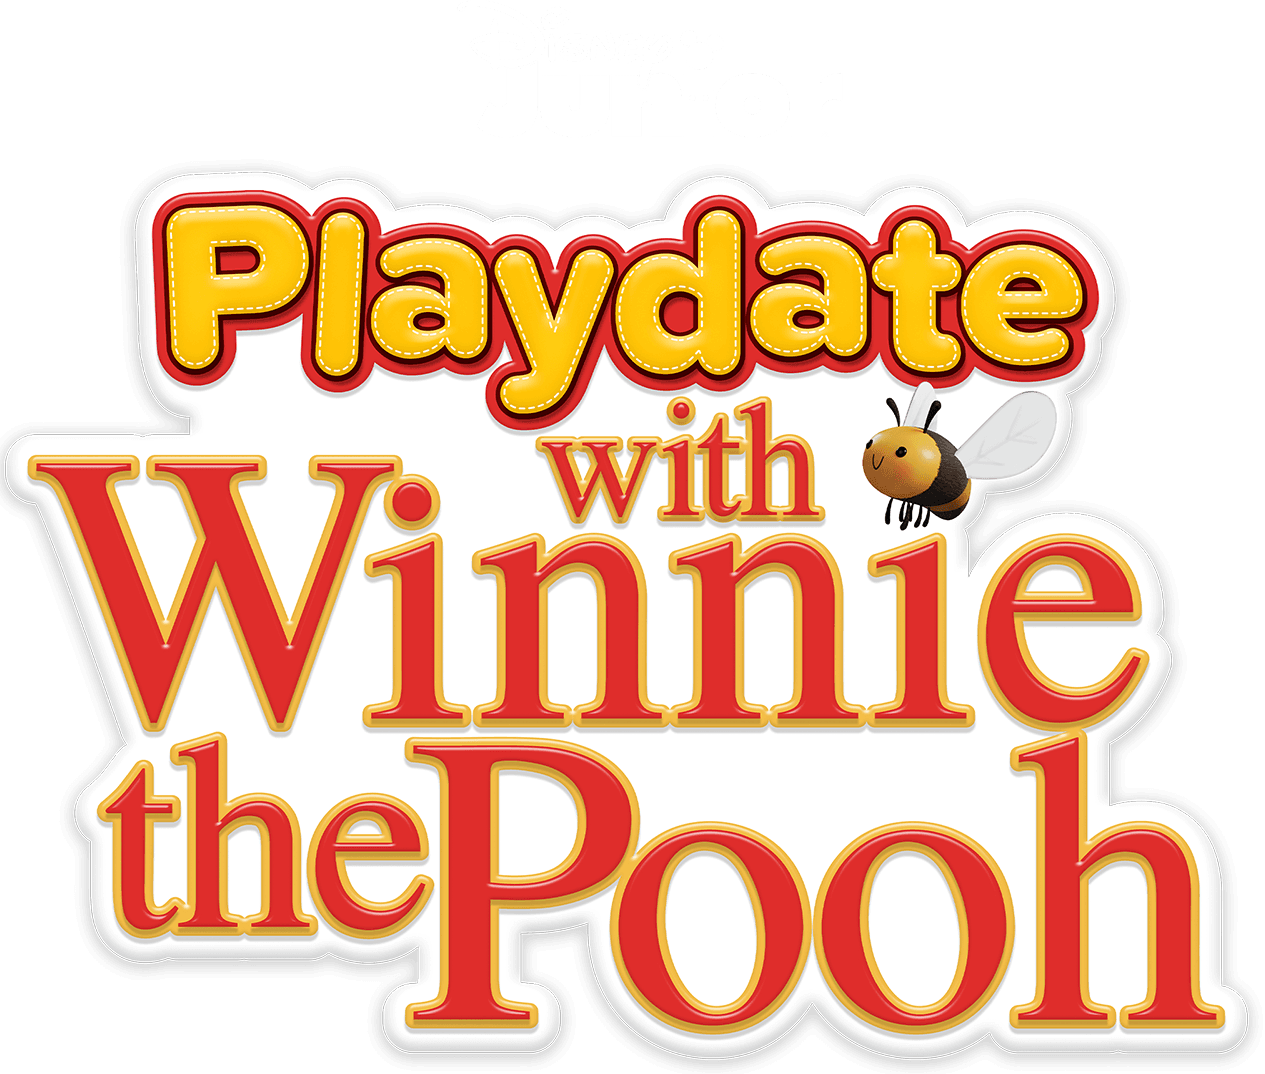 Playdate with Winnie the Pooh logo